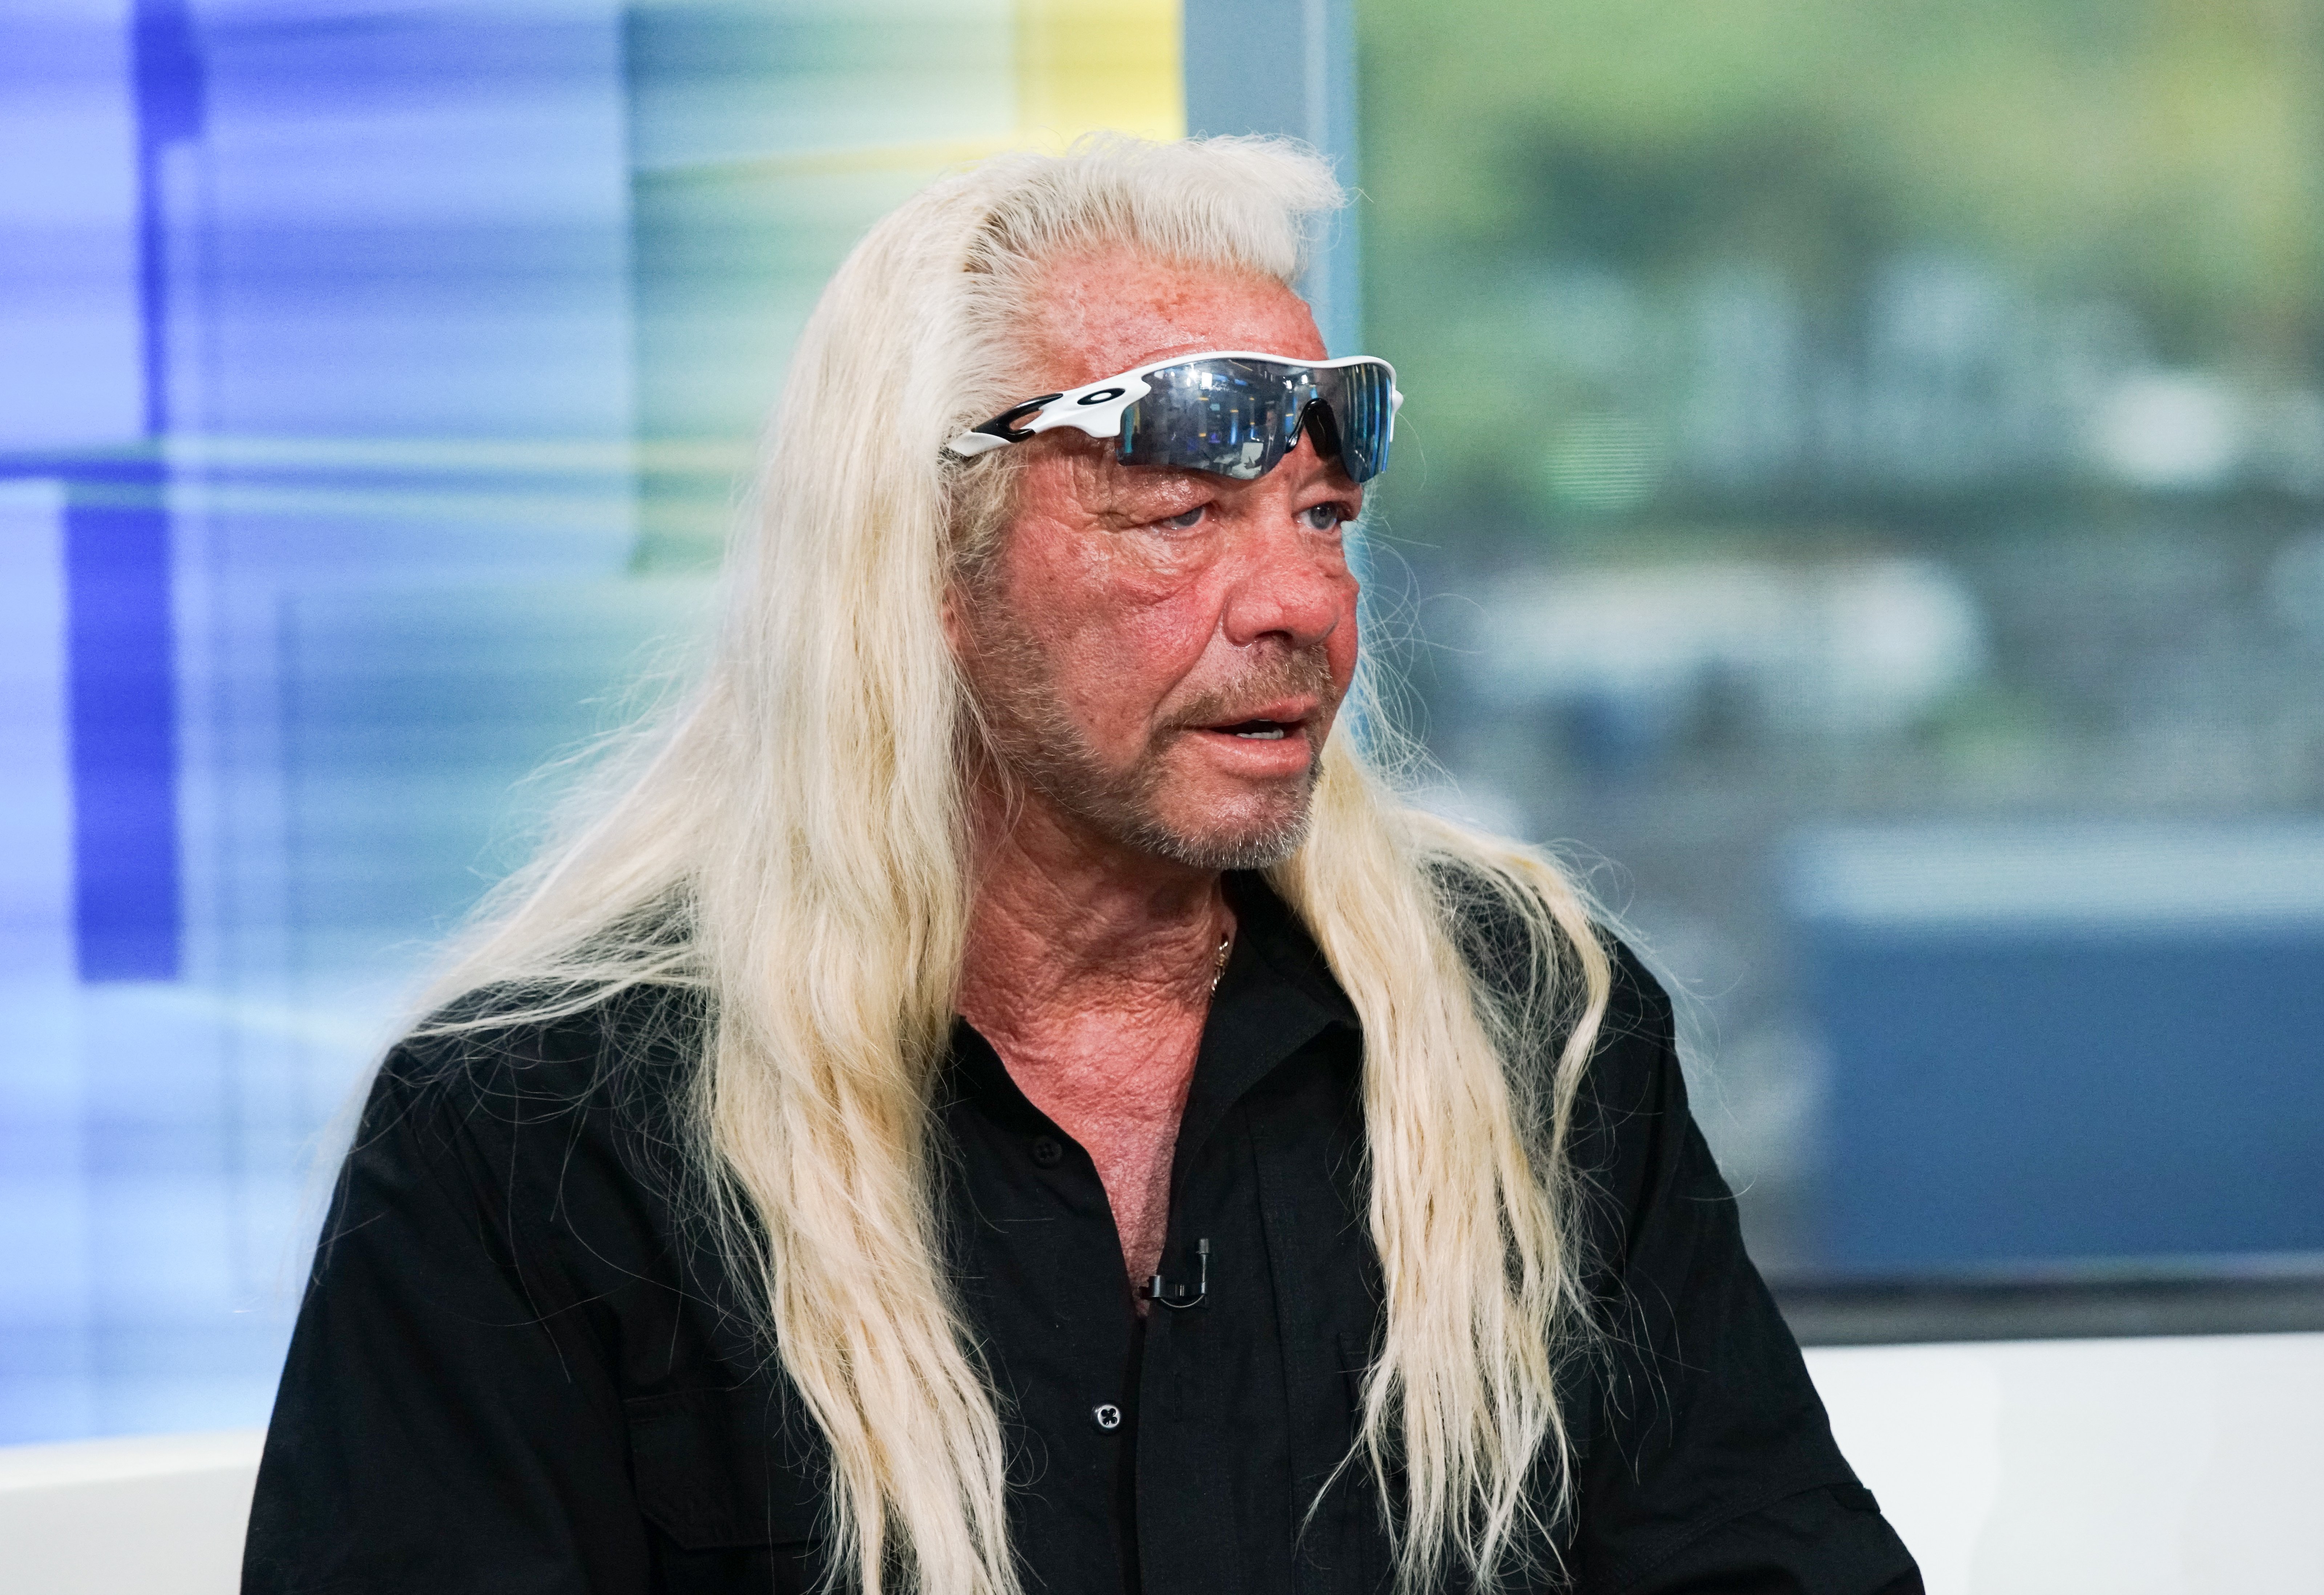 TV personality Duane Chapman aka Dog the Bounty Hunter visits "FOX & Friends" at FOX Studios on August 28, 2019 | Source: Getty Images